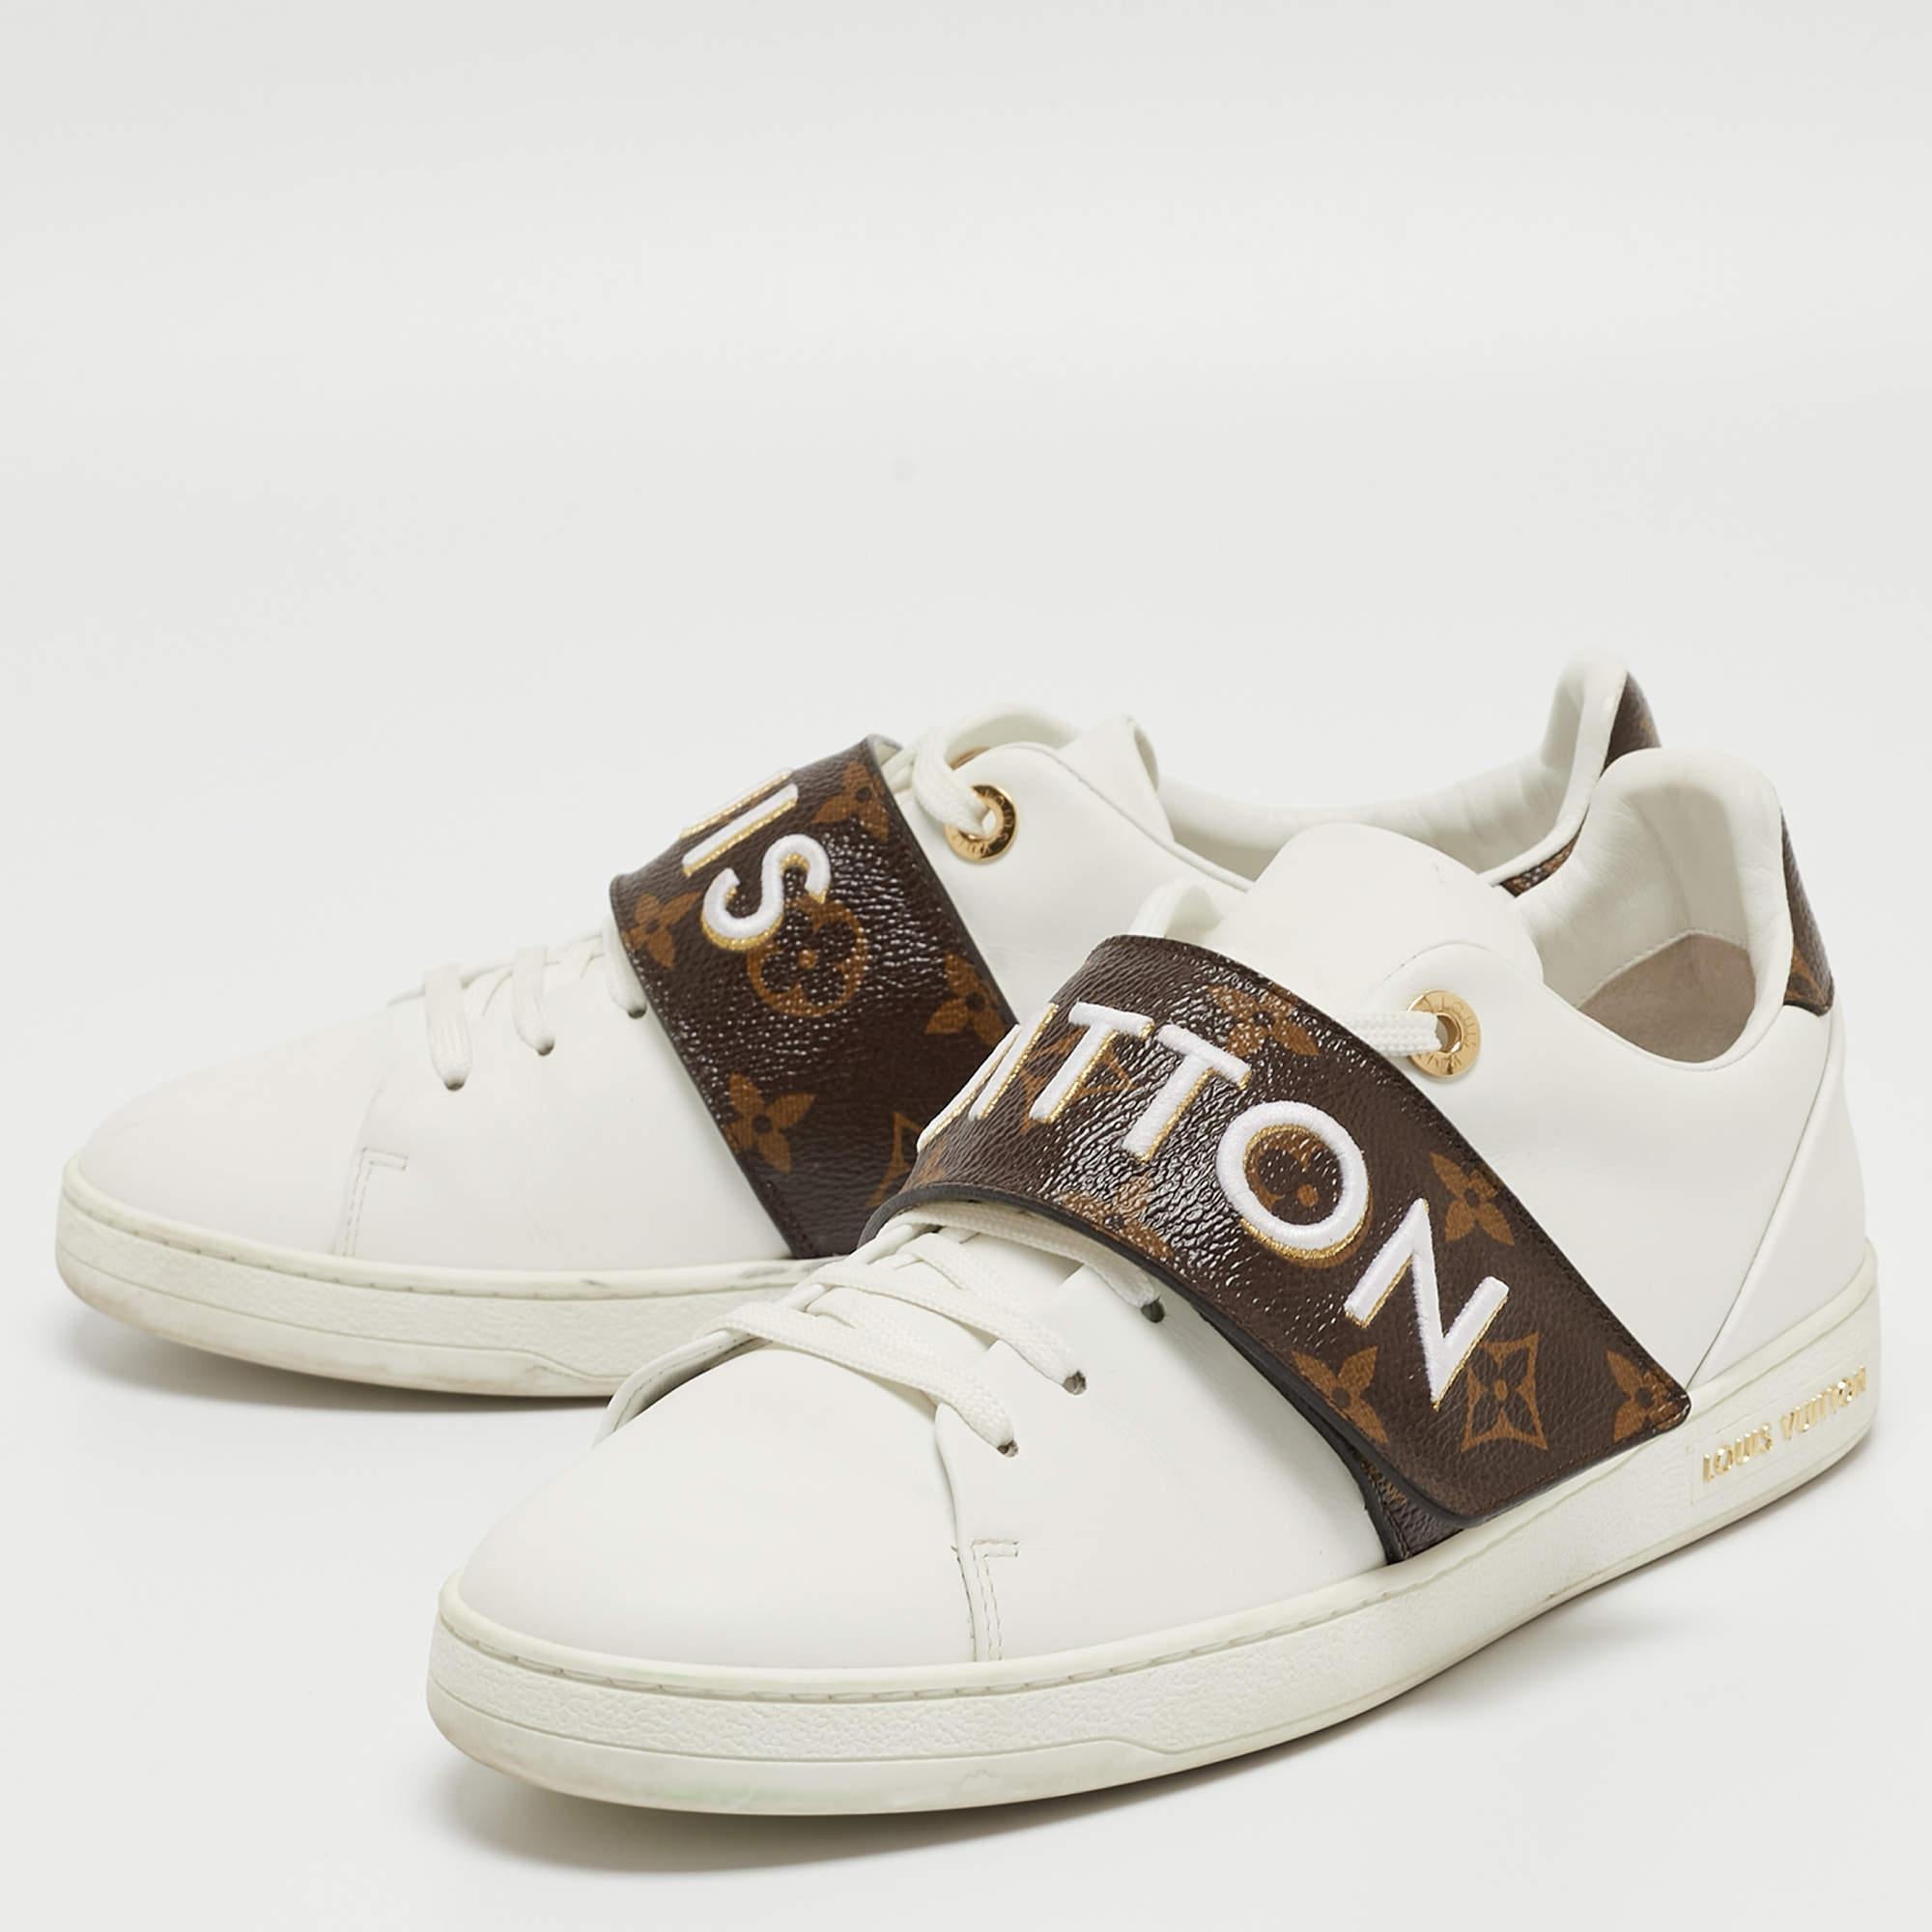 A great way to elevate your casual look, these white sneakers from Louis Vuitton feature a contrasting velcro strap over the lace-up vamps. The brand name vamps adds a luxe touch to the design.

